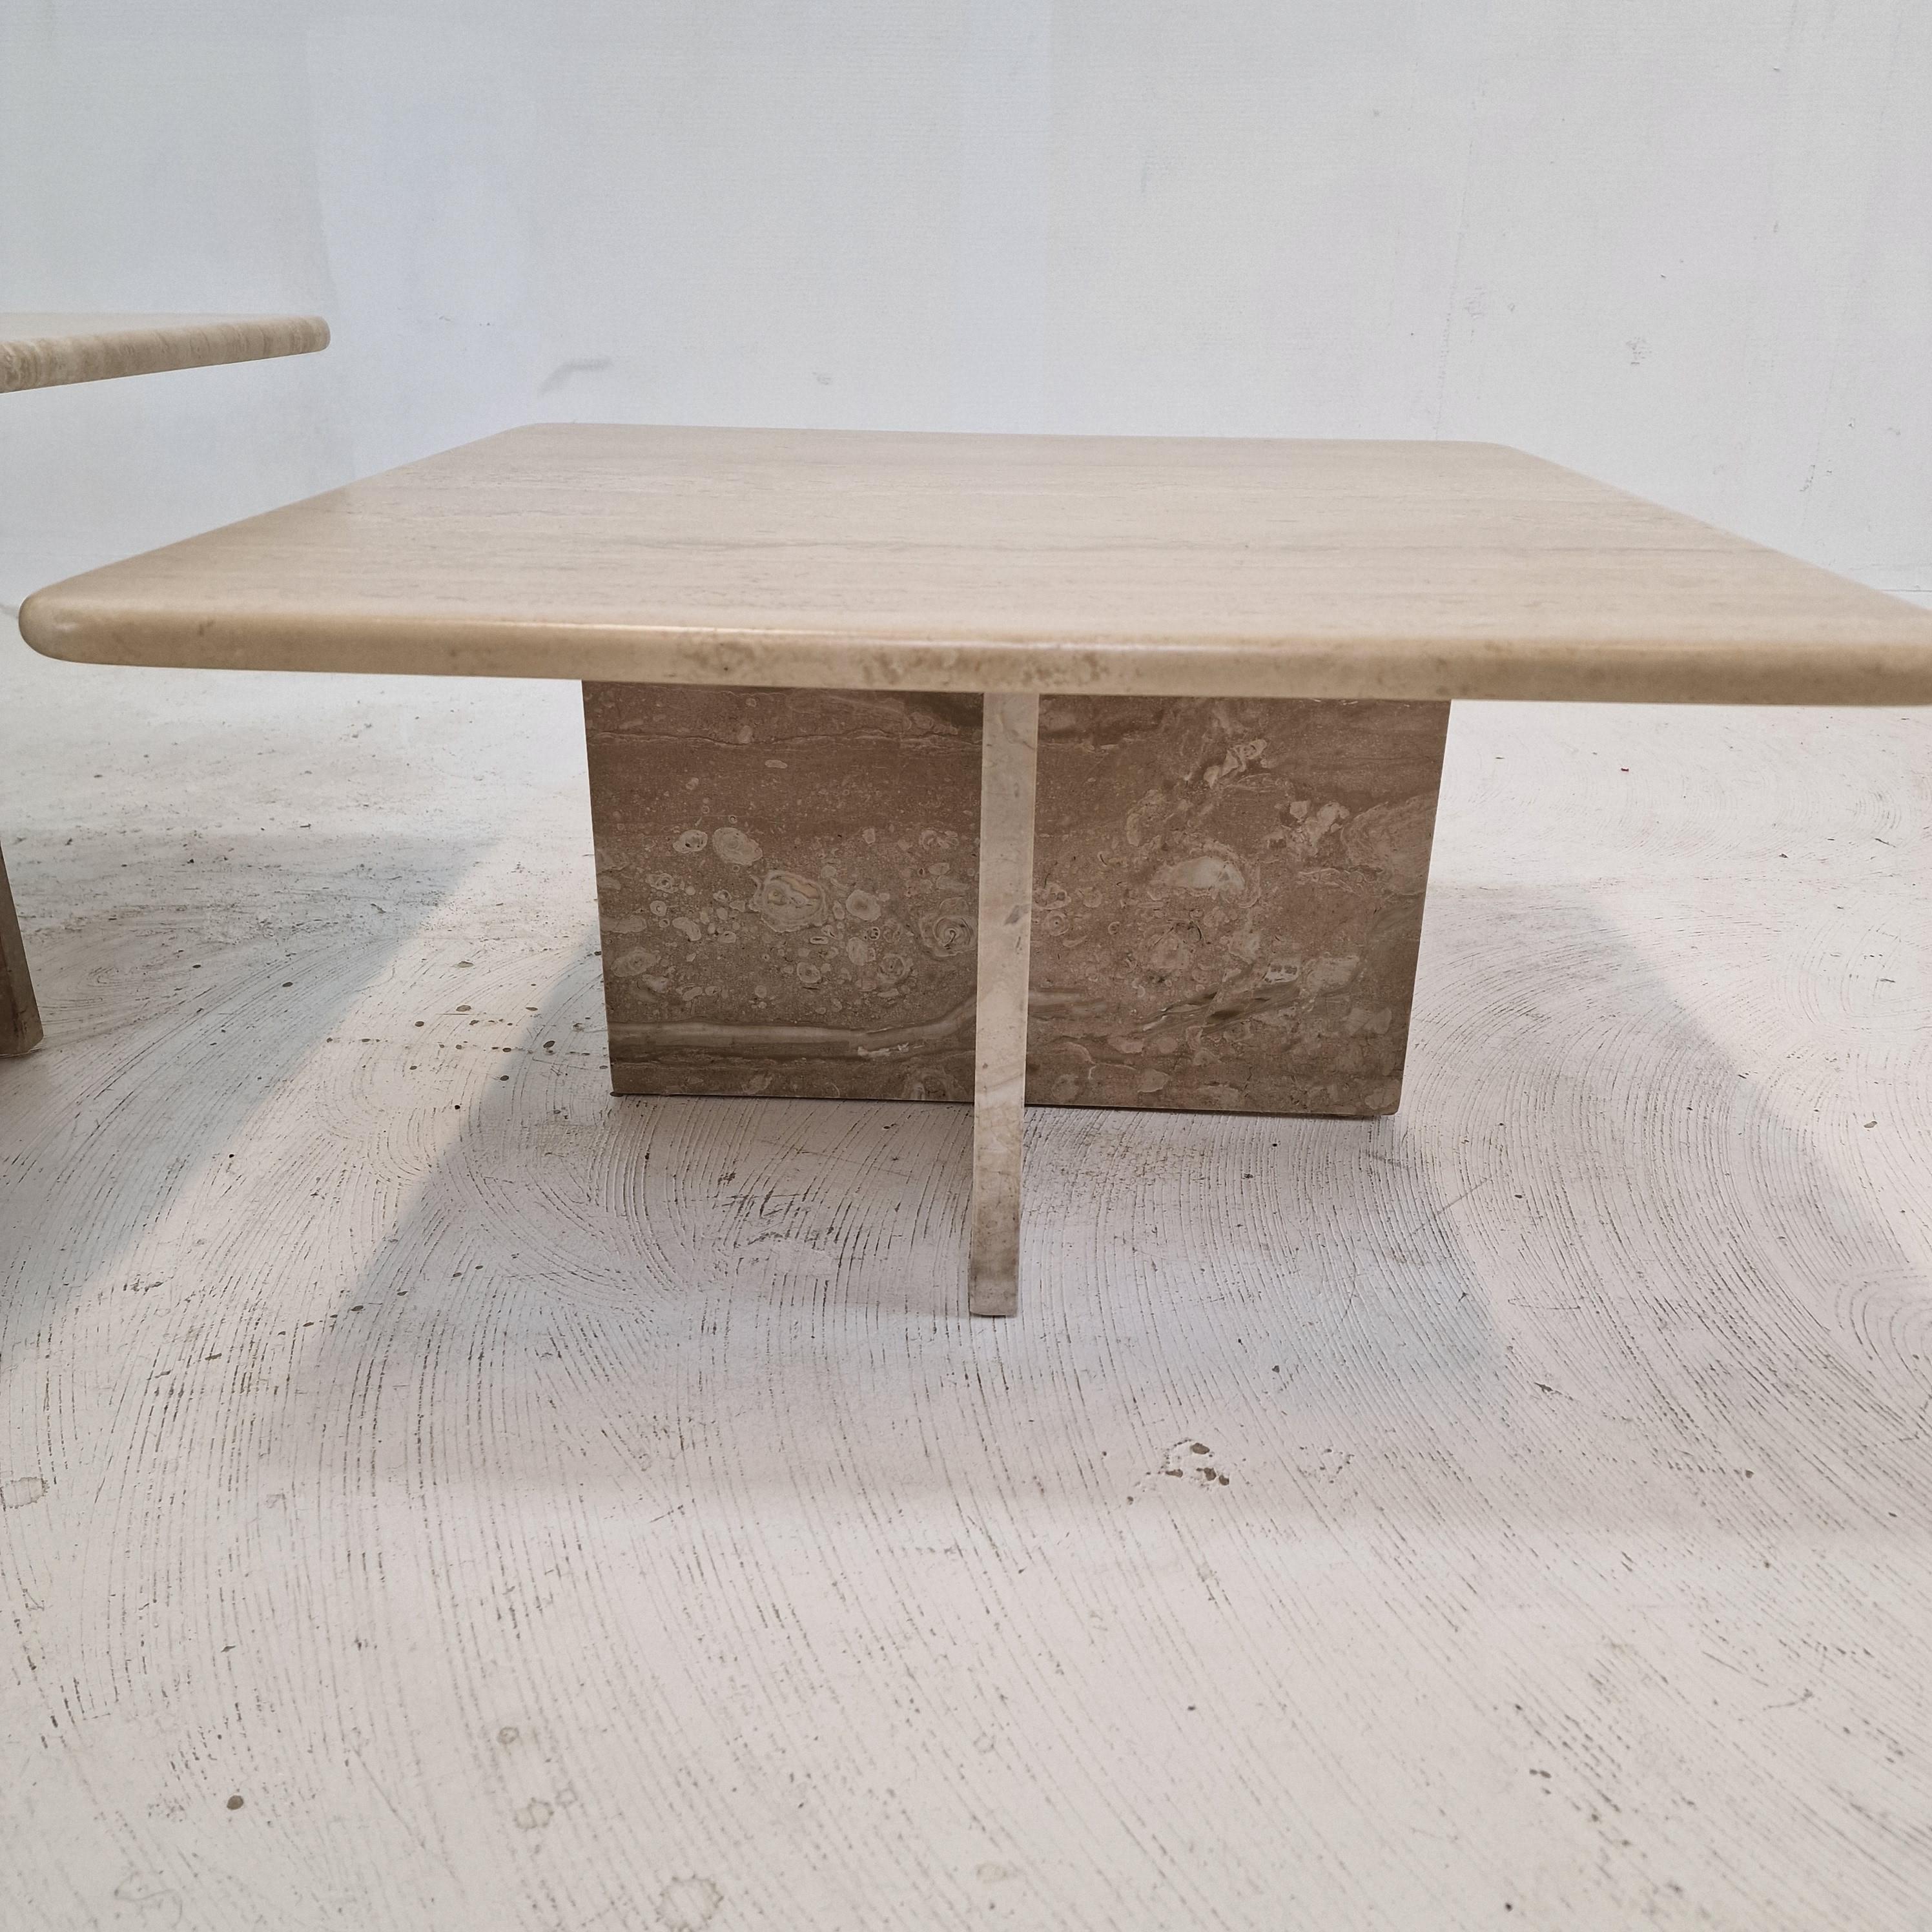 Set of 3 Italian Travertine Coffee or Side Tables, 1990s For Sale 5